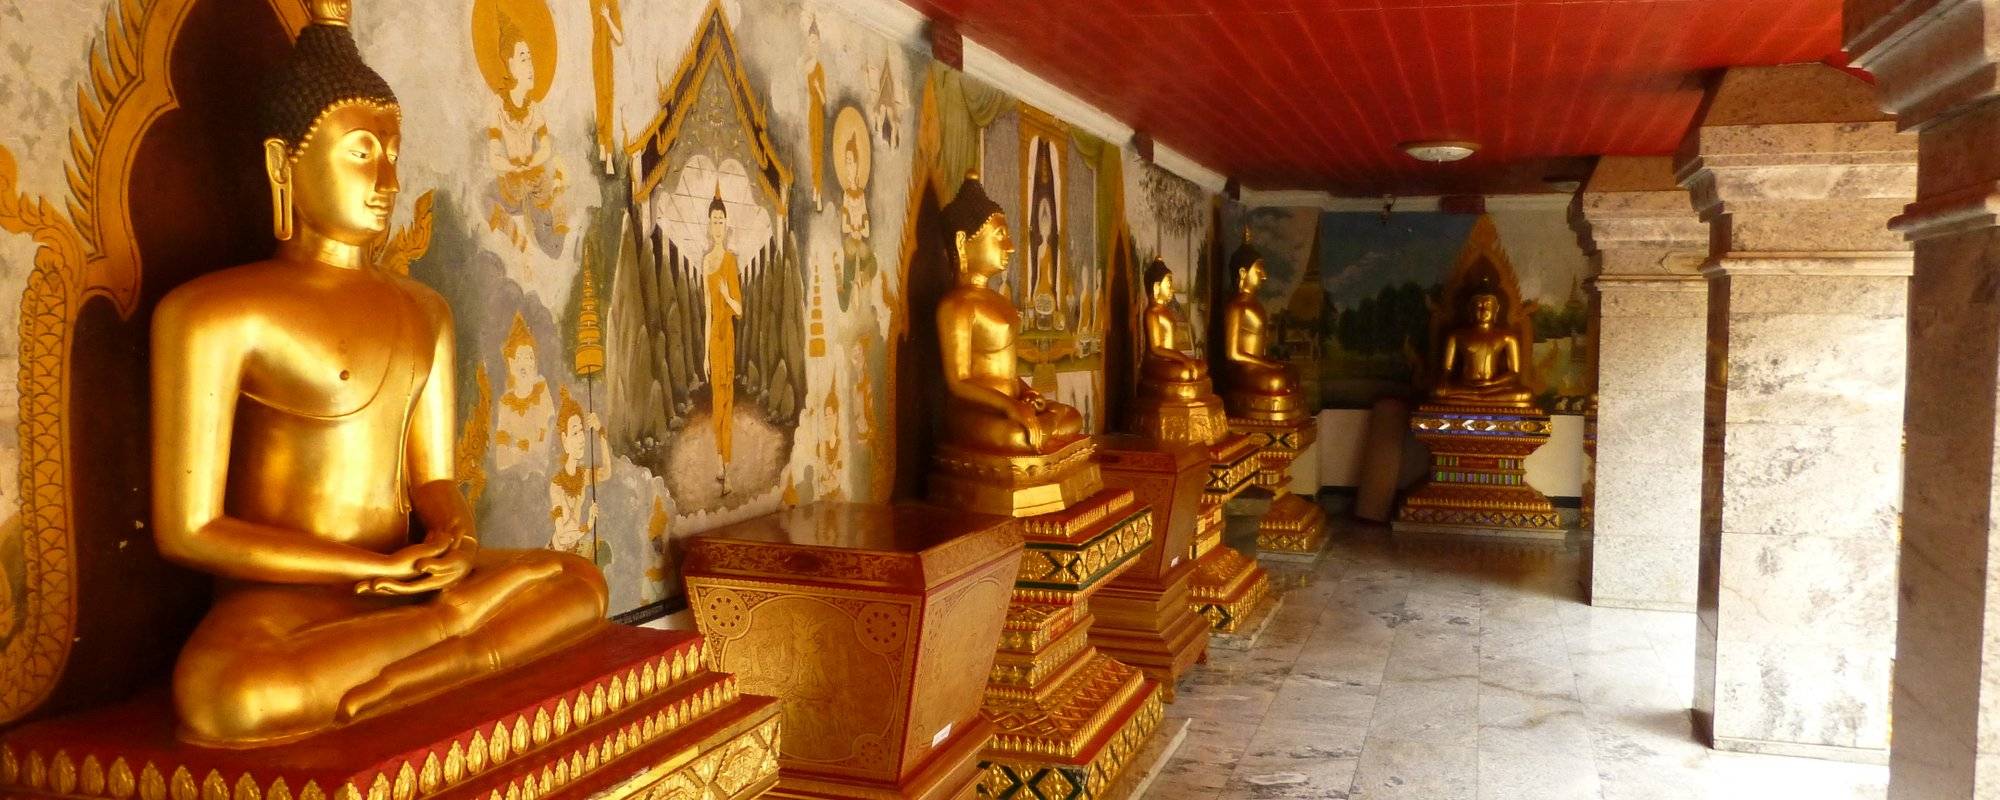 Visiting the Wat Phra That Doi Suthep and its surroundings